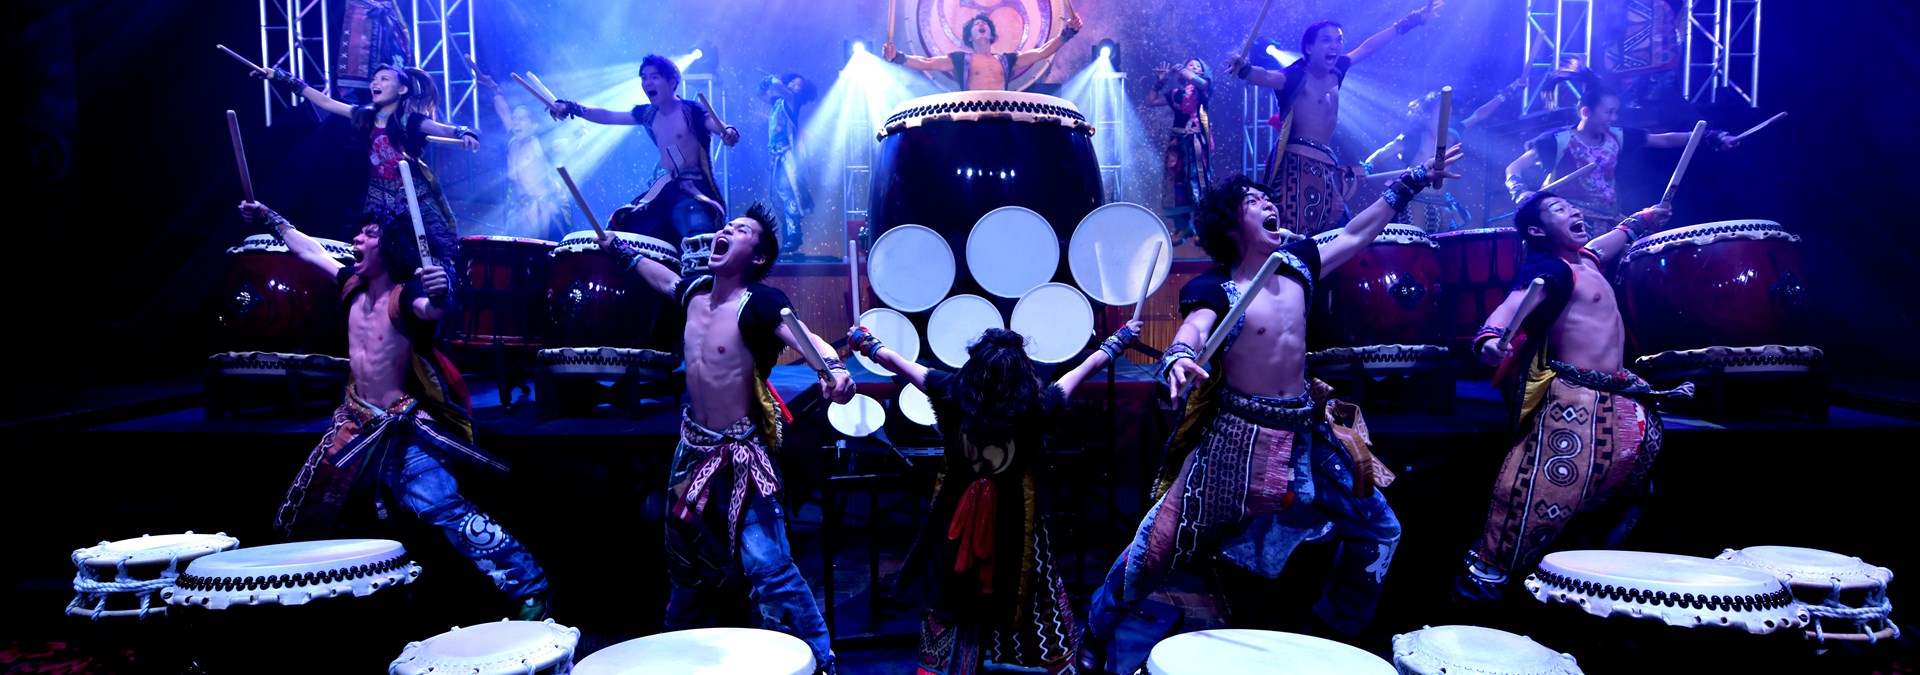 Mei18 Yamato The Drummers Of Japan9 (1)